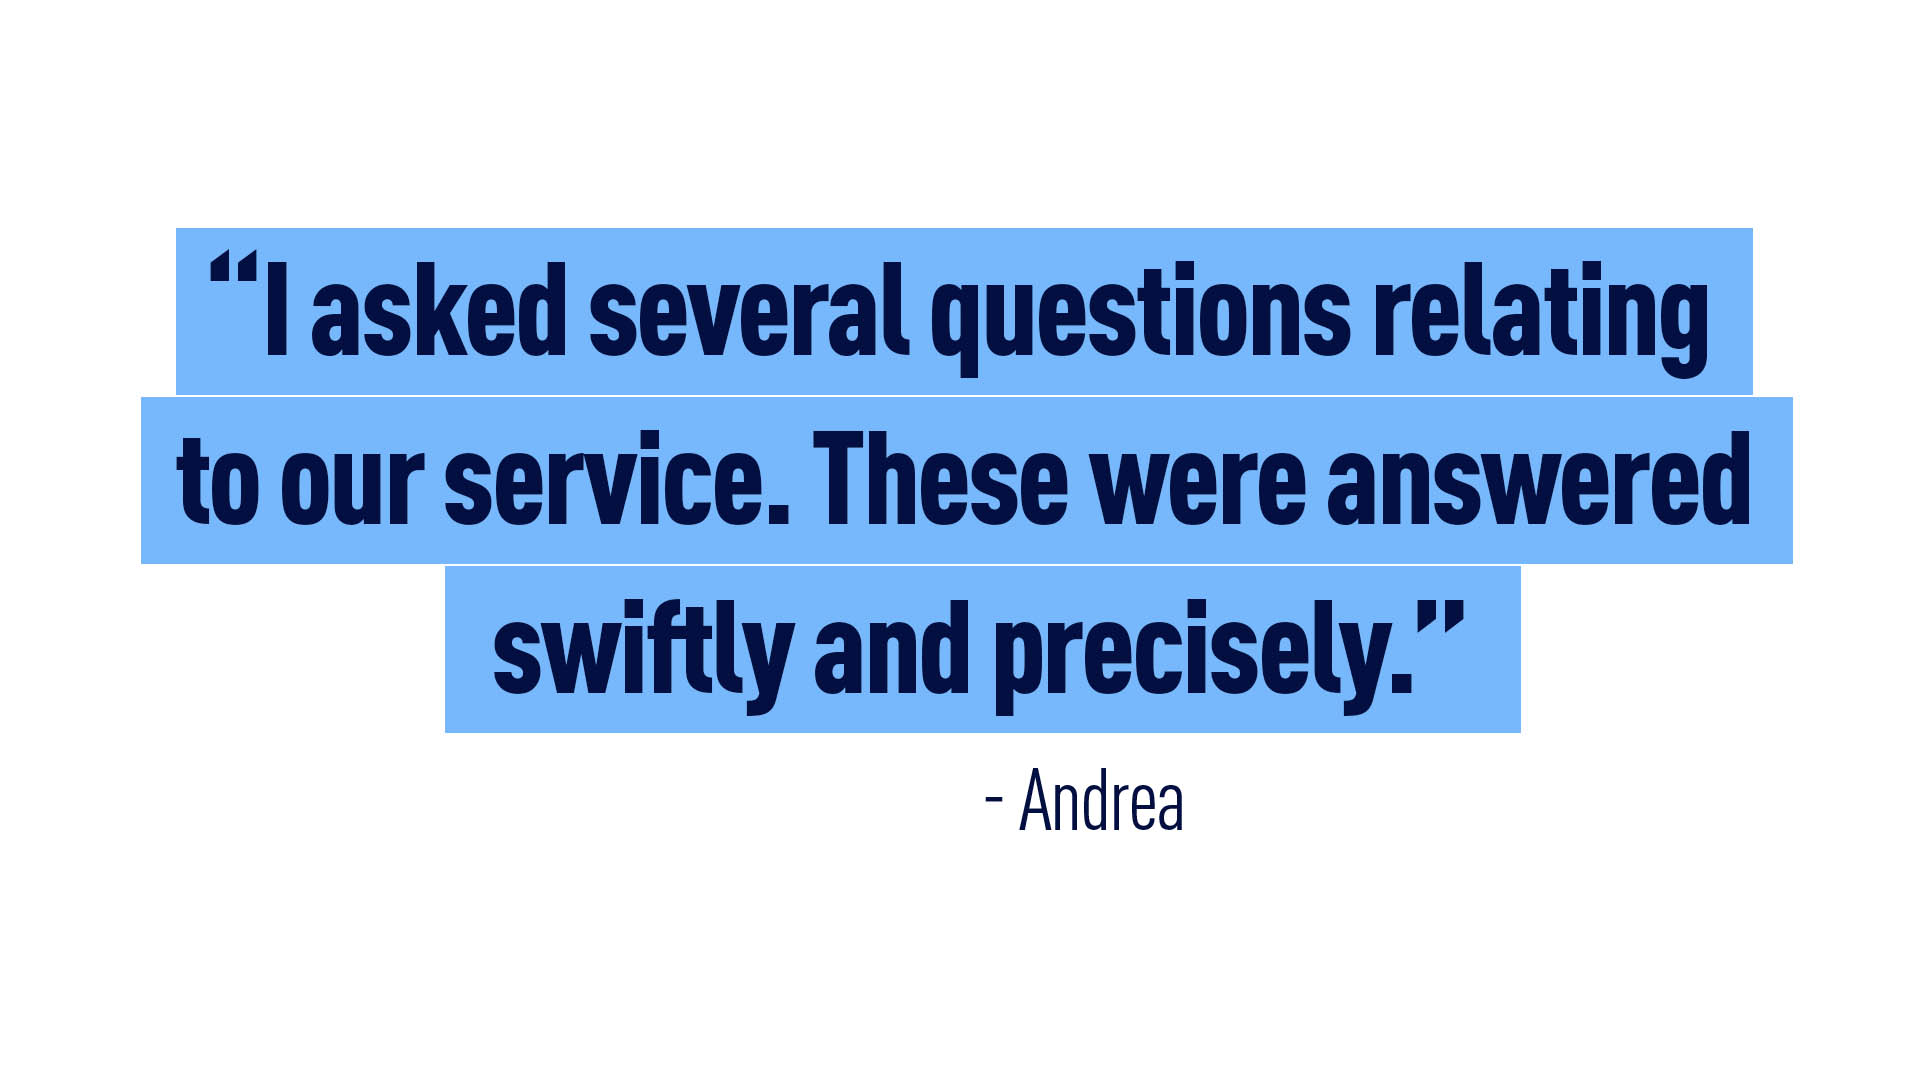 “I asked several questions relating to our service. These were answered swiftly and precisely.” - Andrea